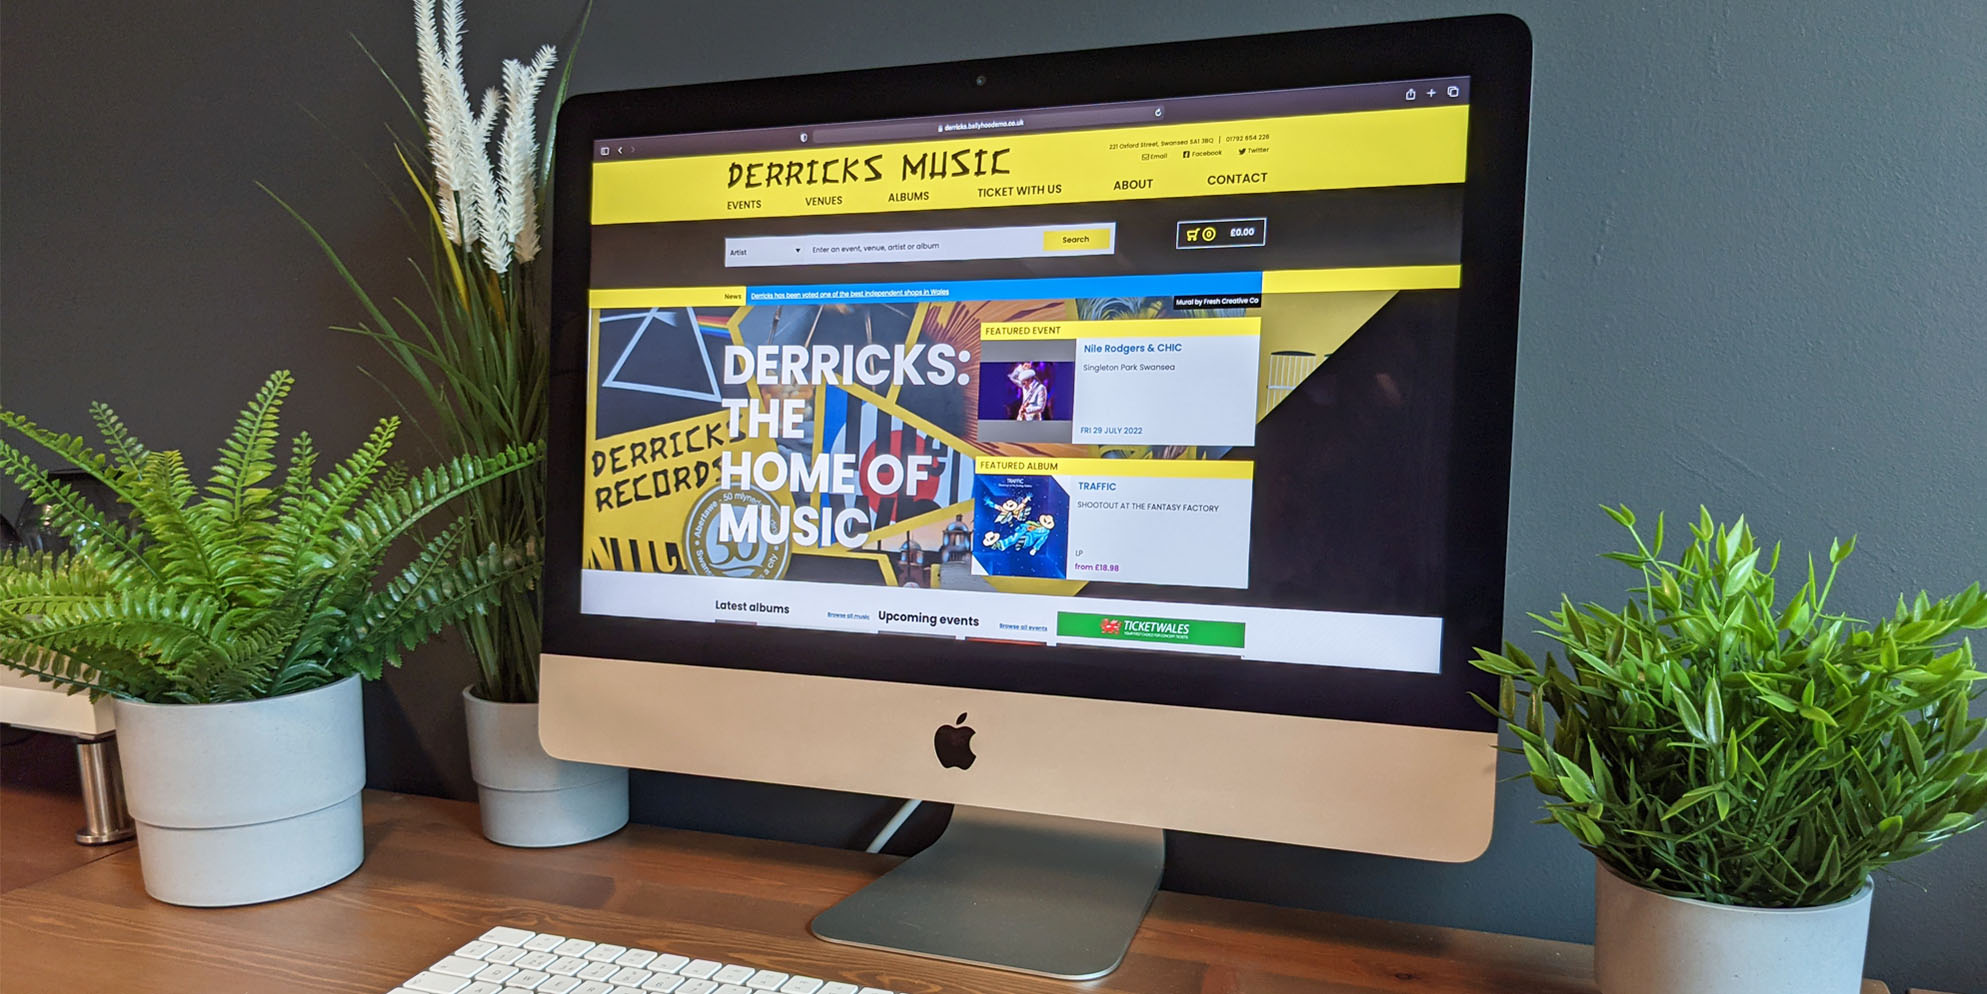 Swansea's Oldest Record Store Derricks Music Launches New Website Developed by Ballyhoo